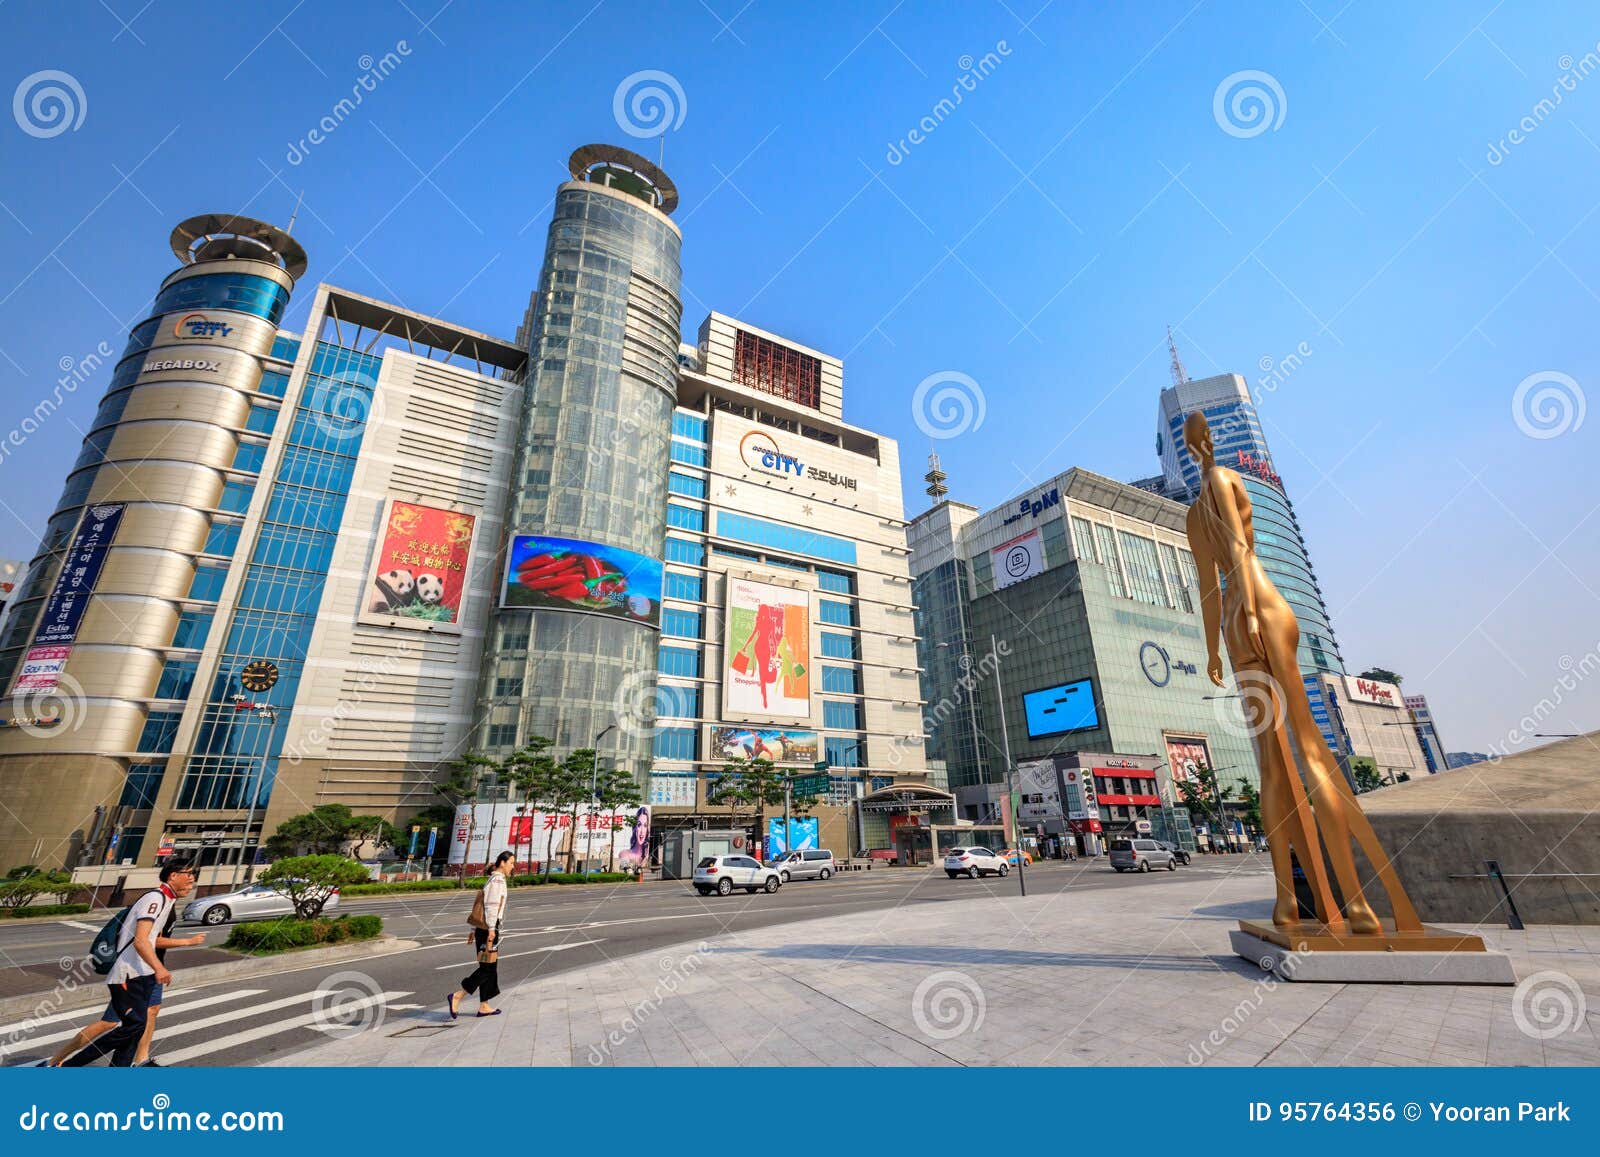 Cityscape Of Dongdaemun On Jun 18, 2017. It Is A Commercial And ...